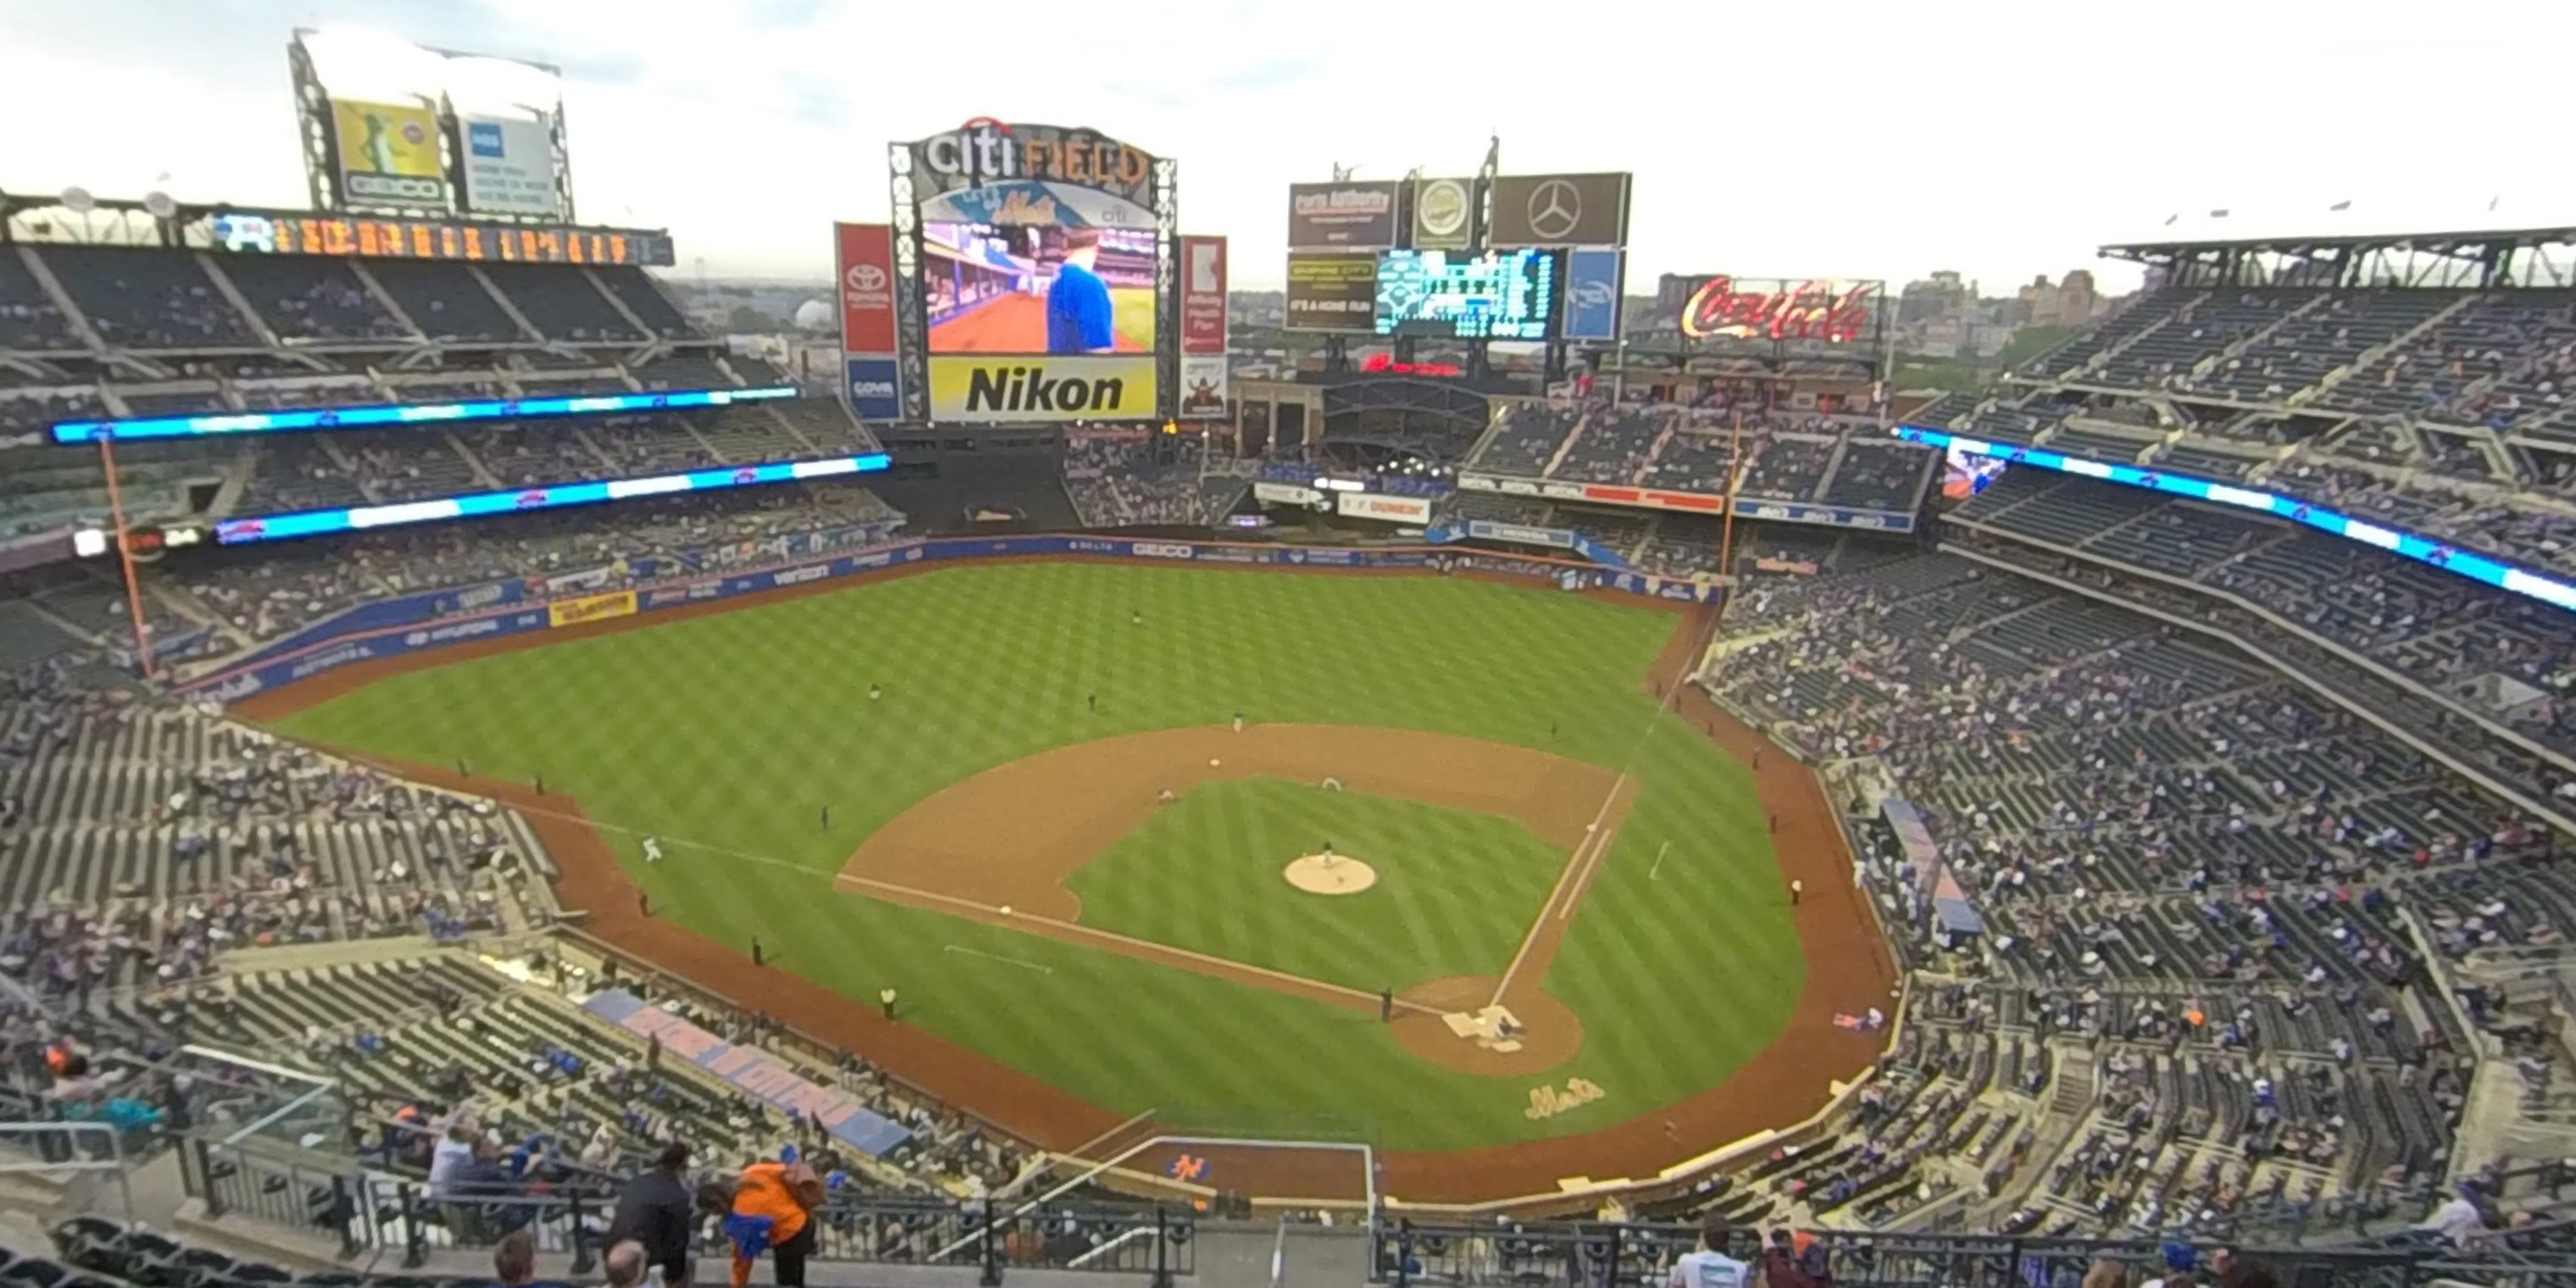 section 517 panoramic seat view  - citi field